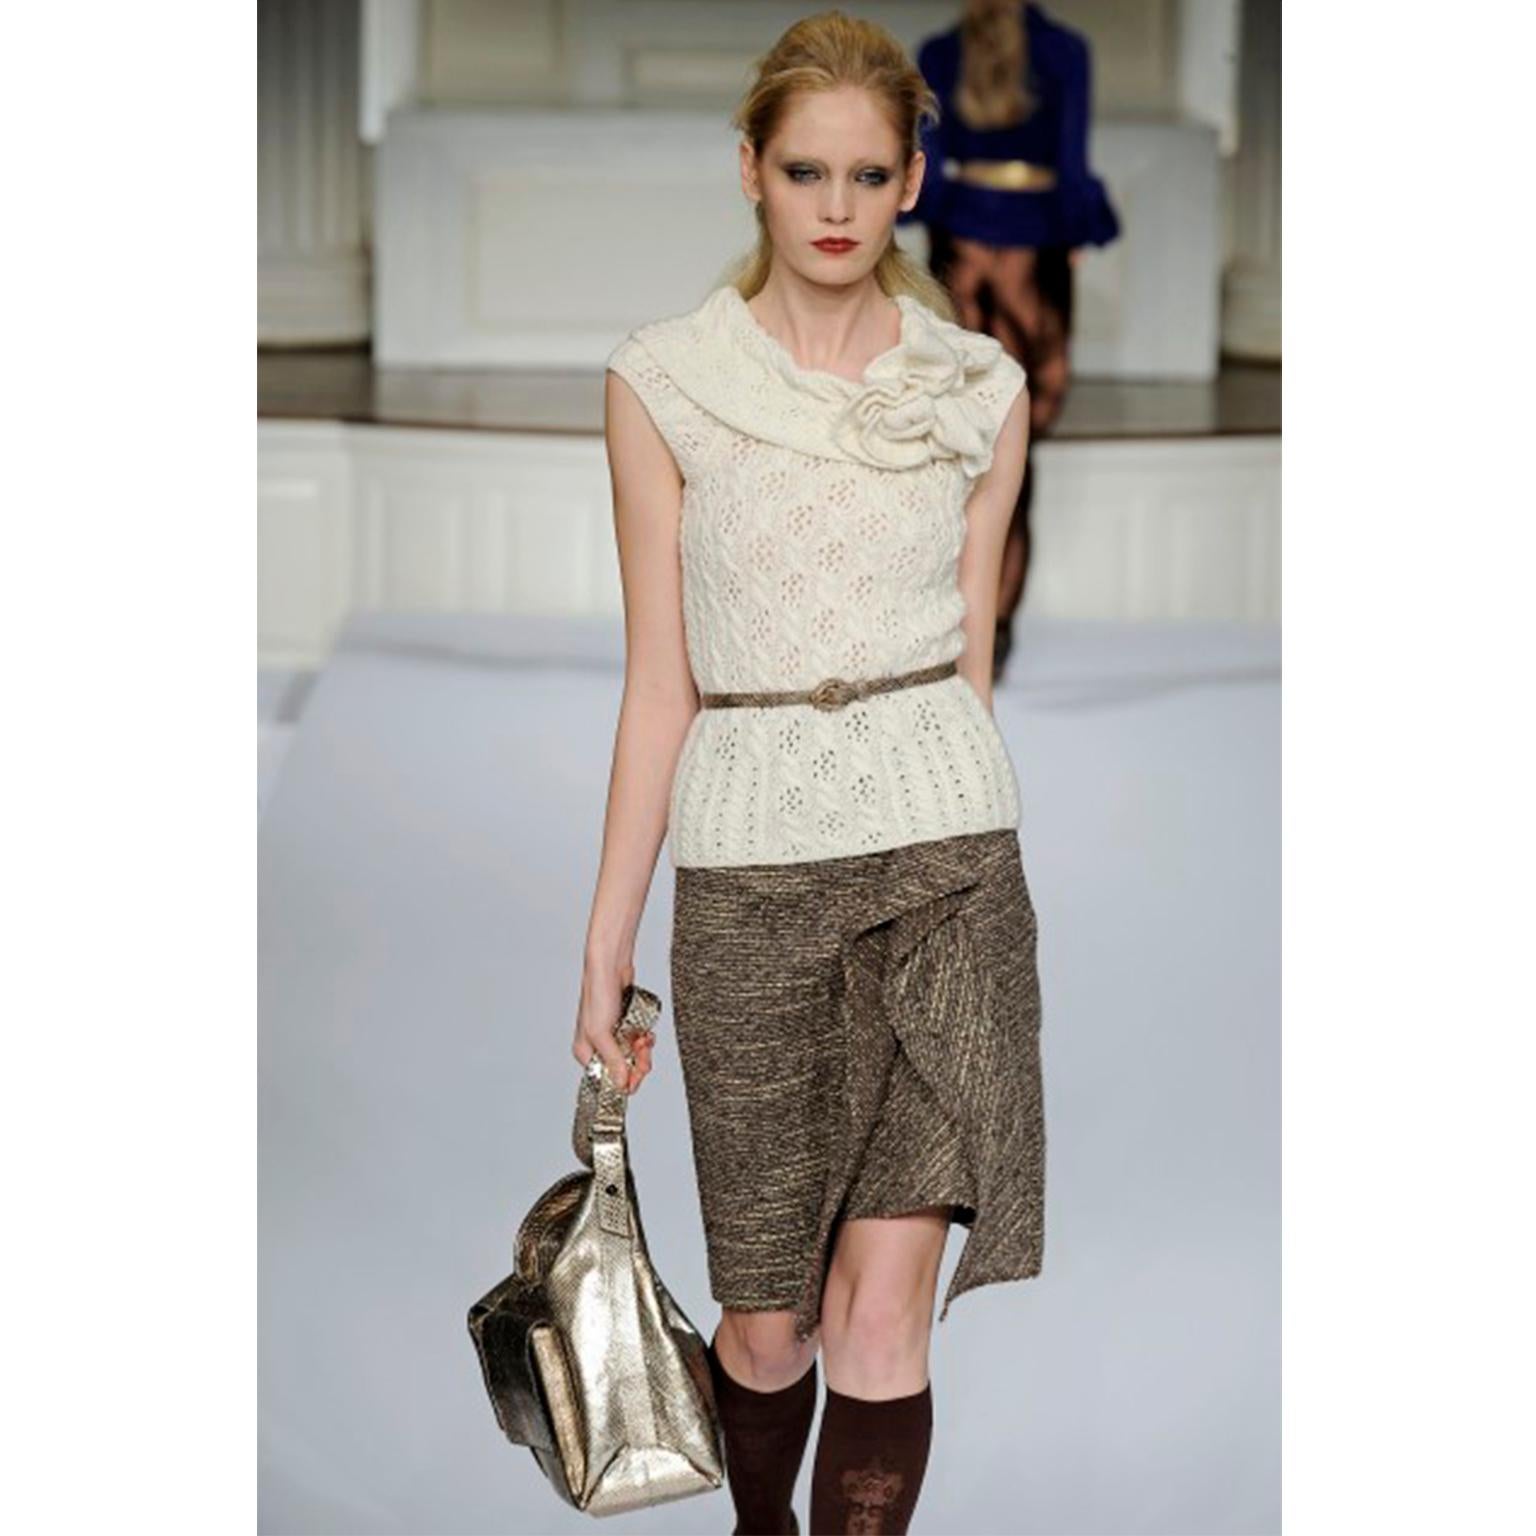 This is a lovely Oscar de la Renta Brown and Cream Tweed Skirt with a pretty attached panel ruffle from his Pre-Fall 2009 collection. It has a nice fit, and the ruffle causes movement and interest when you walk!
This pretty skirt is in wool,